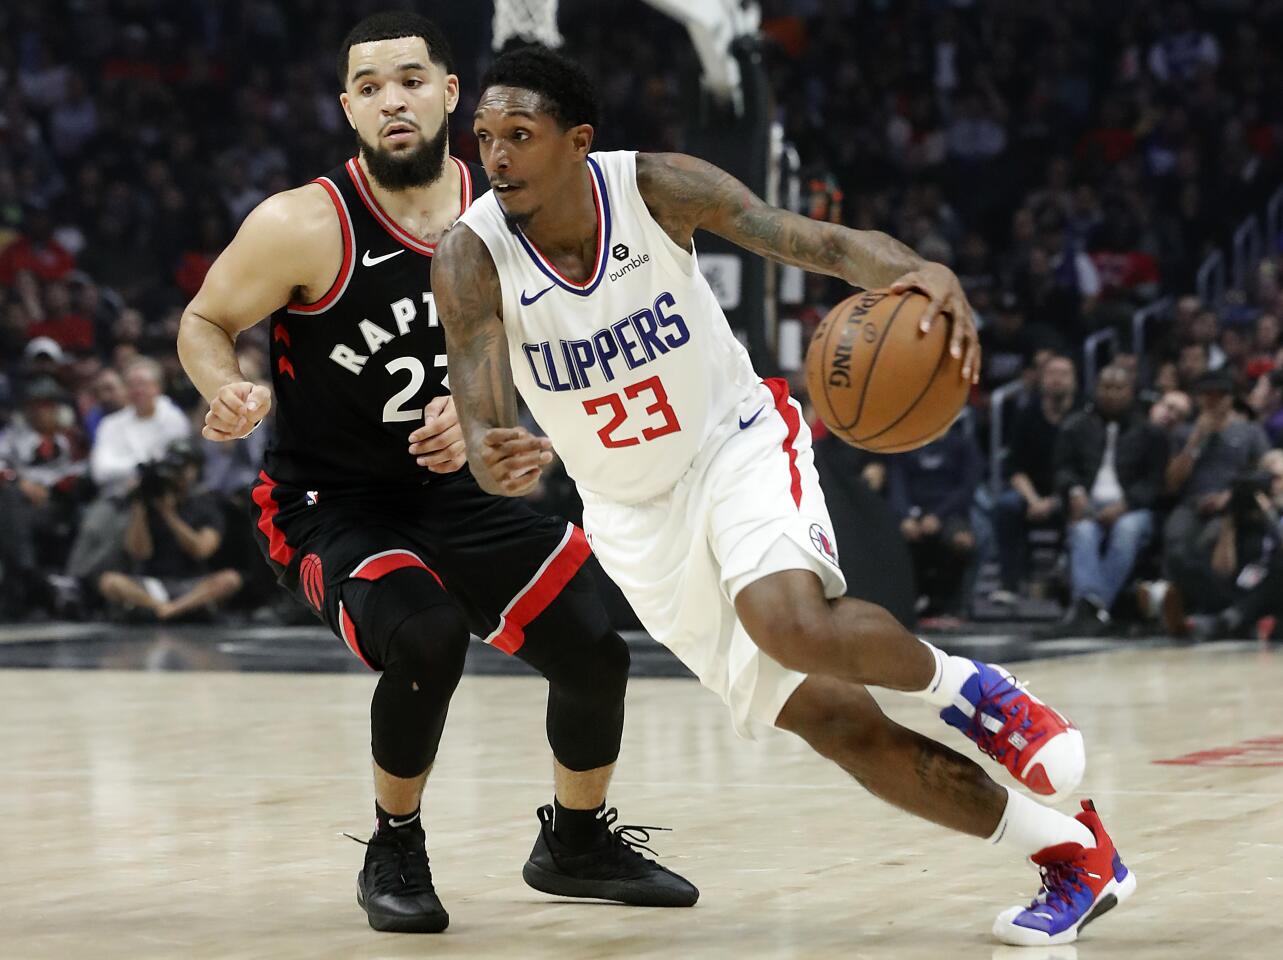 Clippers guard Lou Williams drives to the basket past Raptors guard Fred VanVleet during a game Nov. 11 at Staples Center.